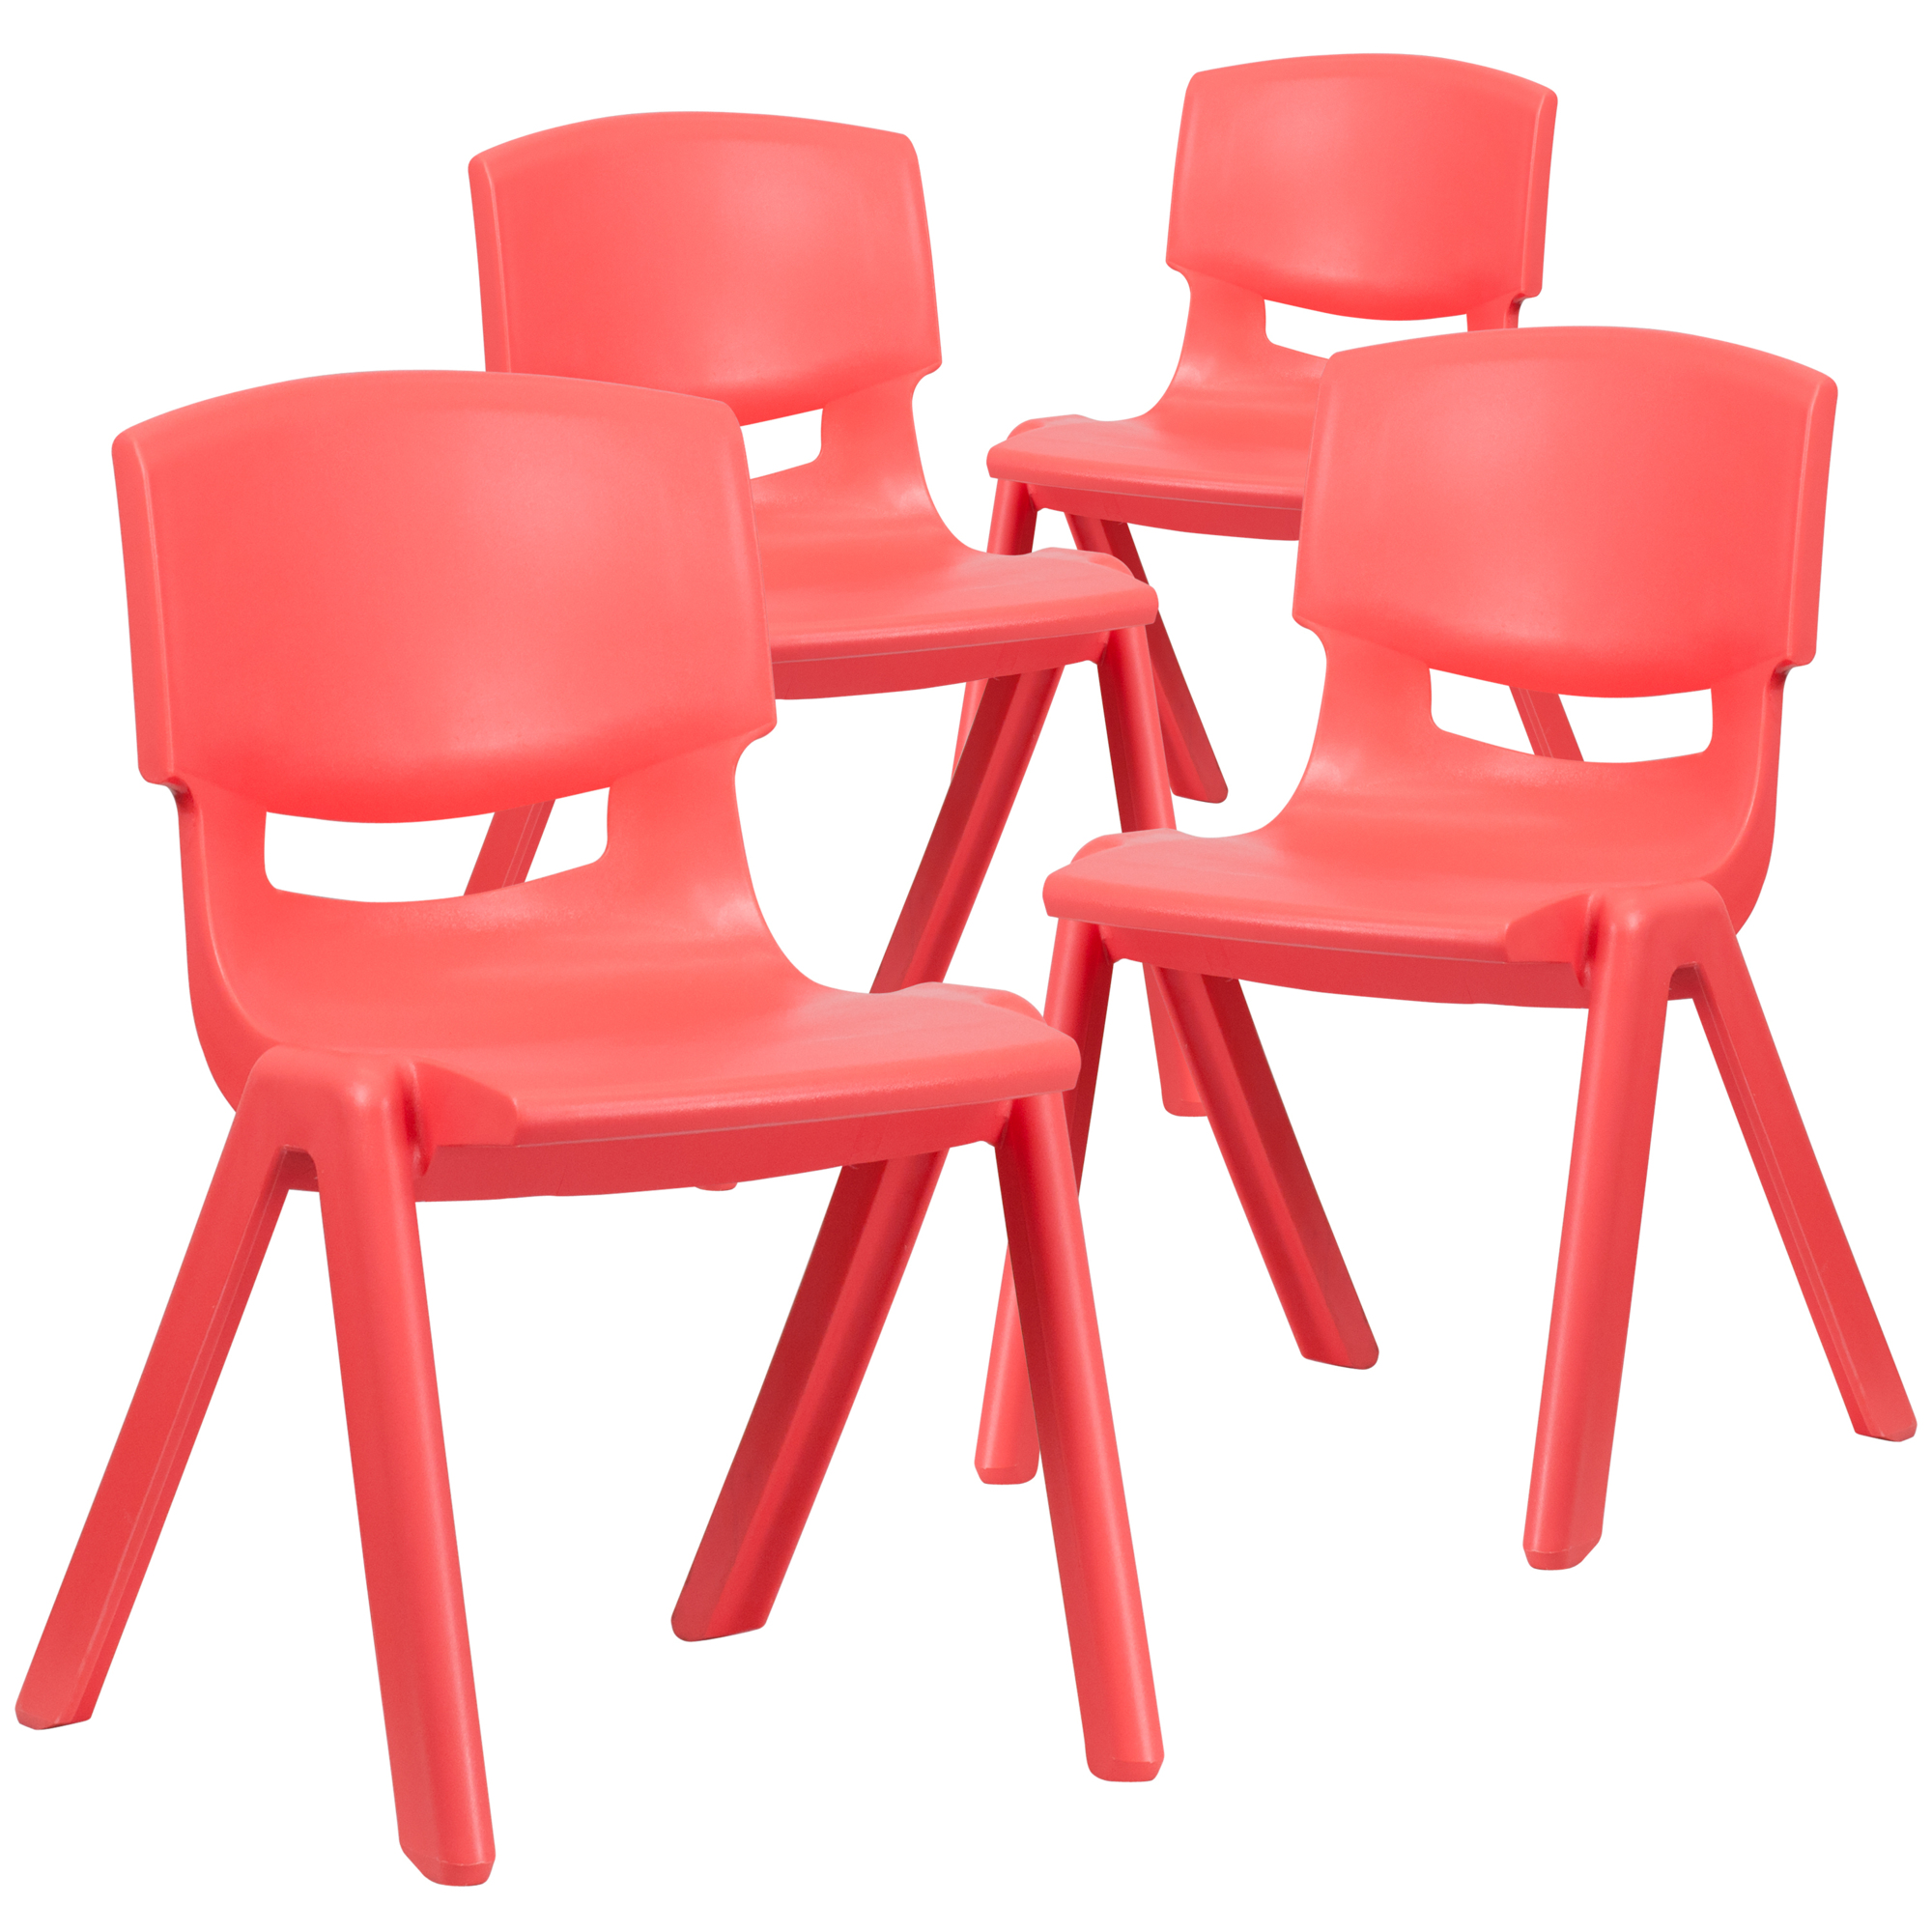 Flash Furniture, 4 Pack Red Plastic School Chair-15.5Inch H Seat, Primary Color Red, Included (qty.) 4, Model 4YUYCX4005RED